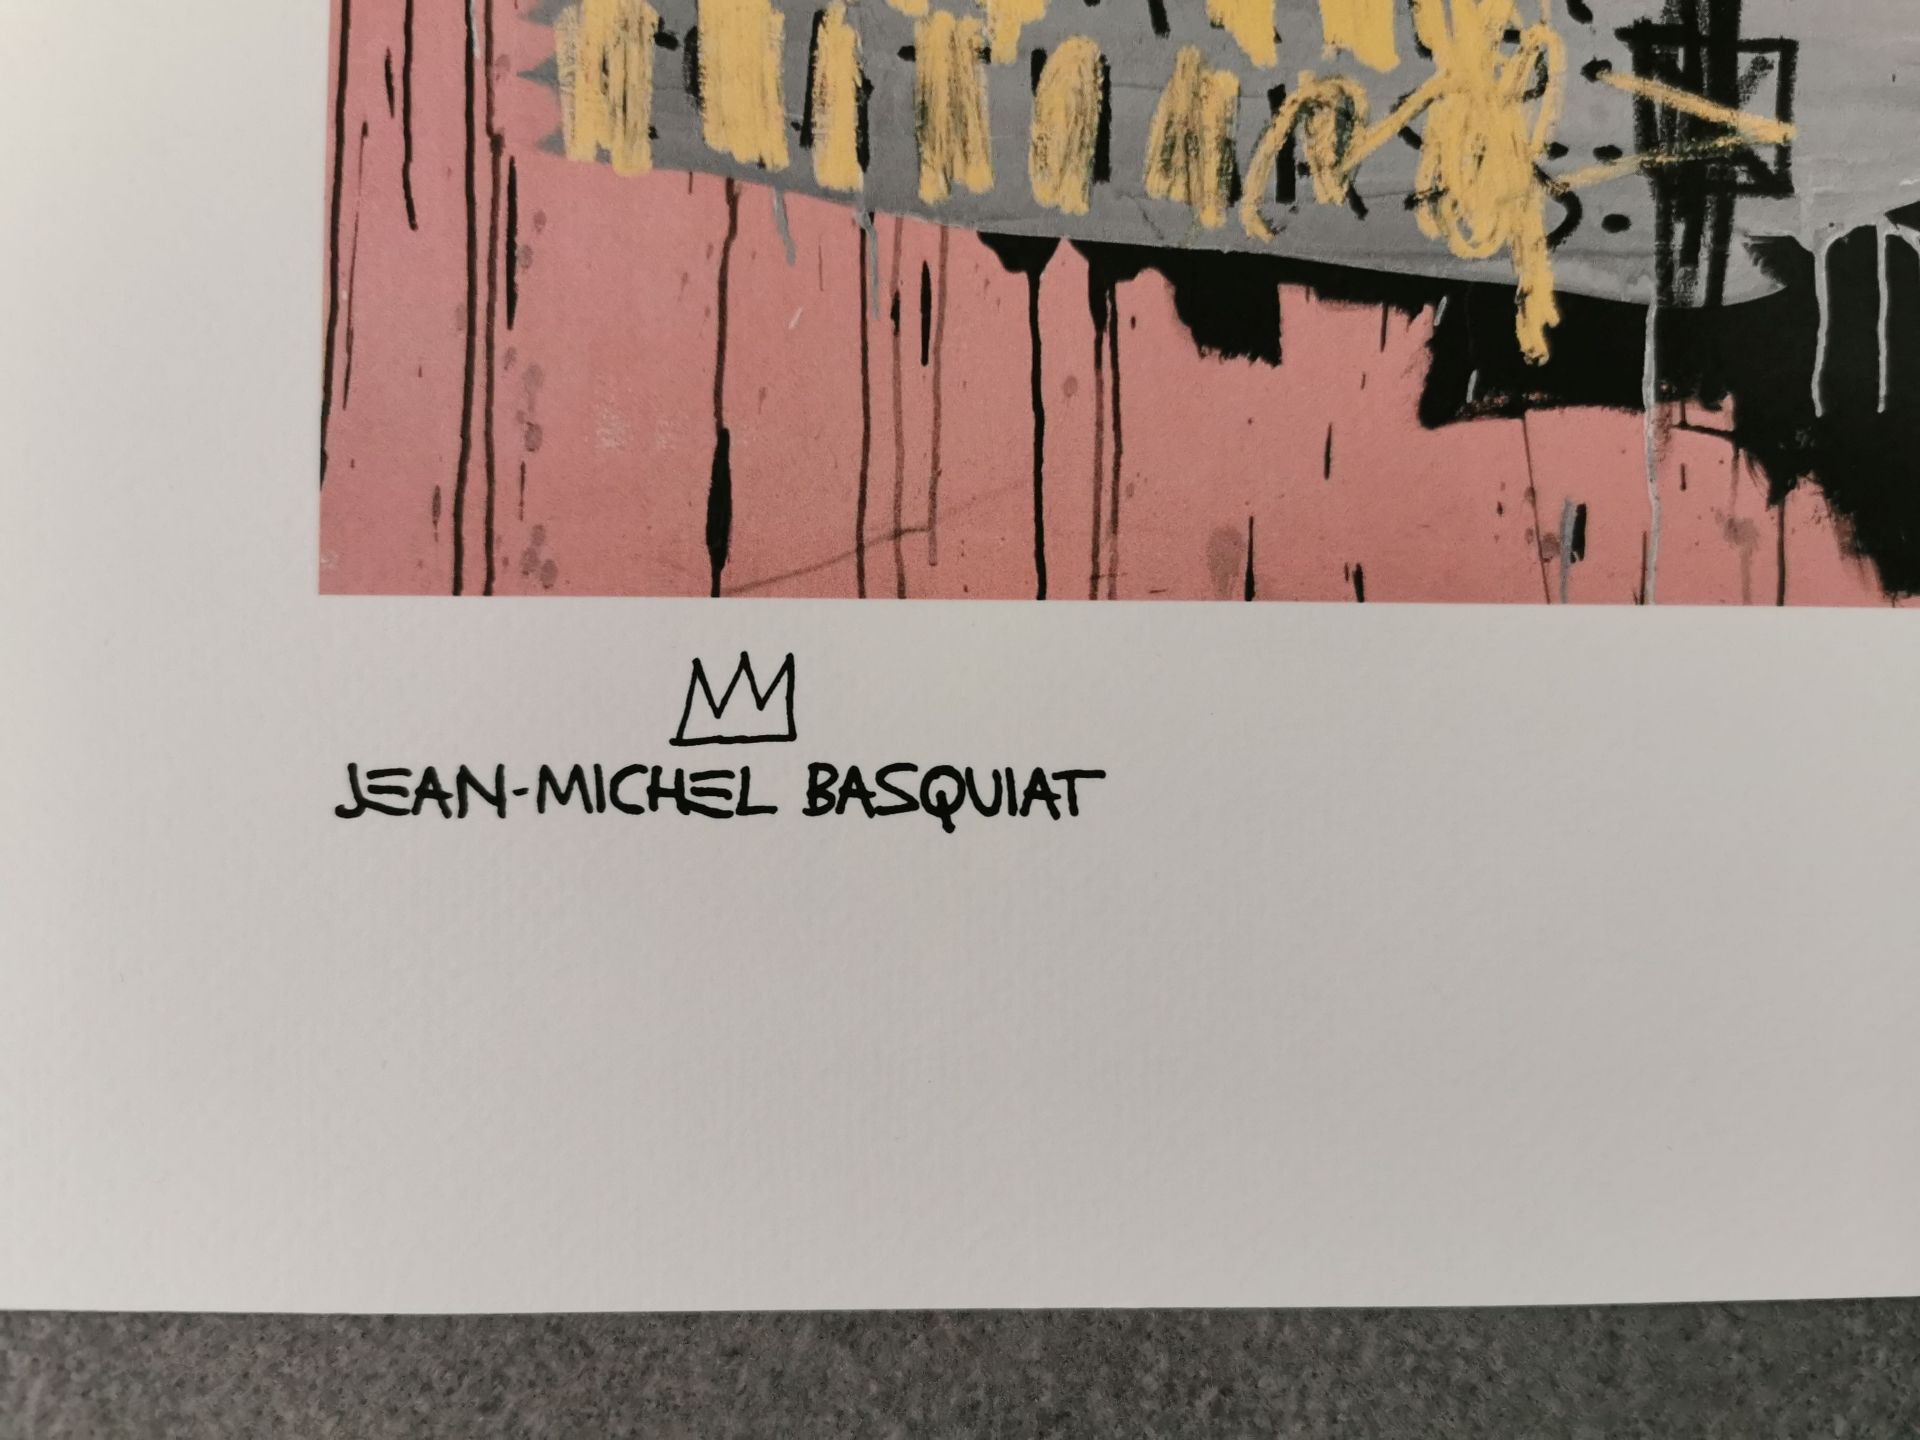 GRAPHICS AFTER JEAN-MICHEL BASQUIAT - Image 2 of 3